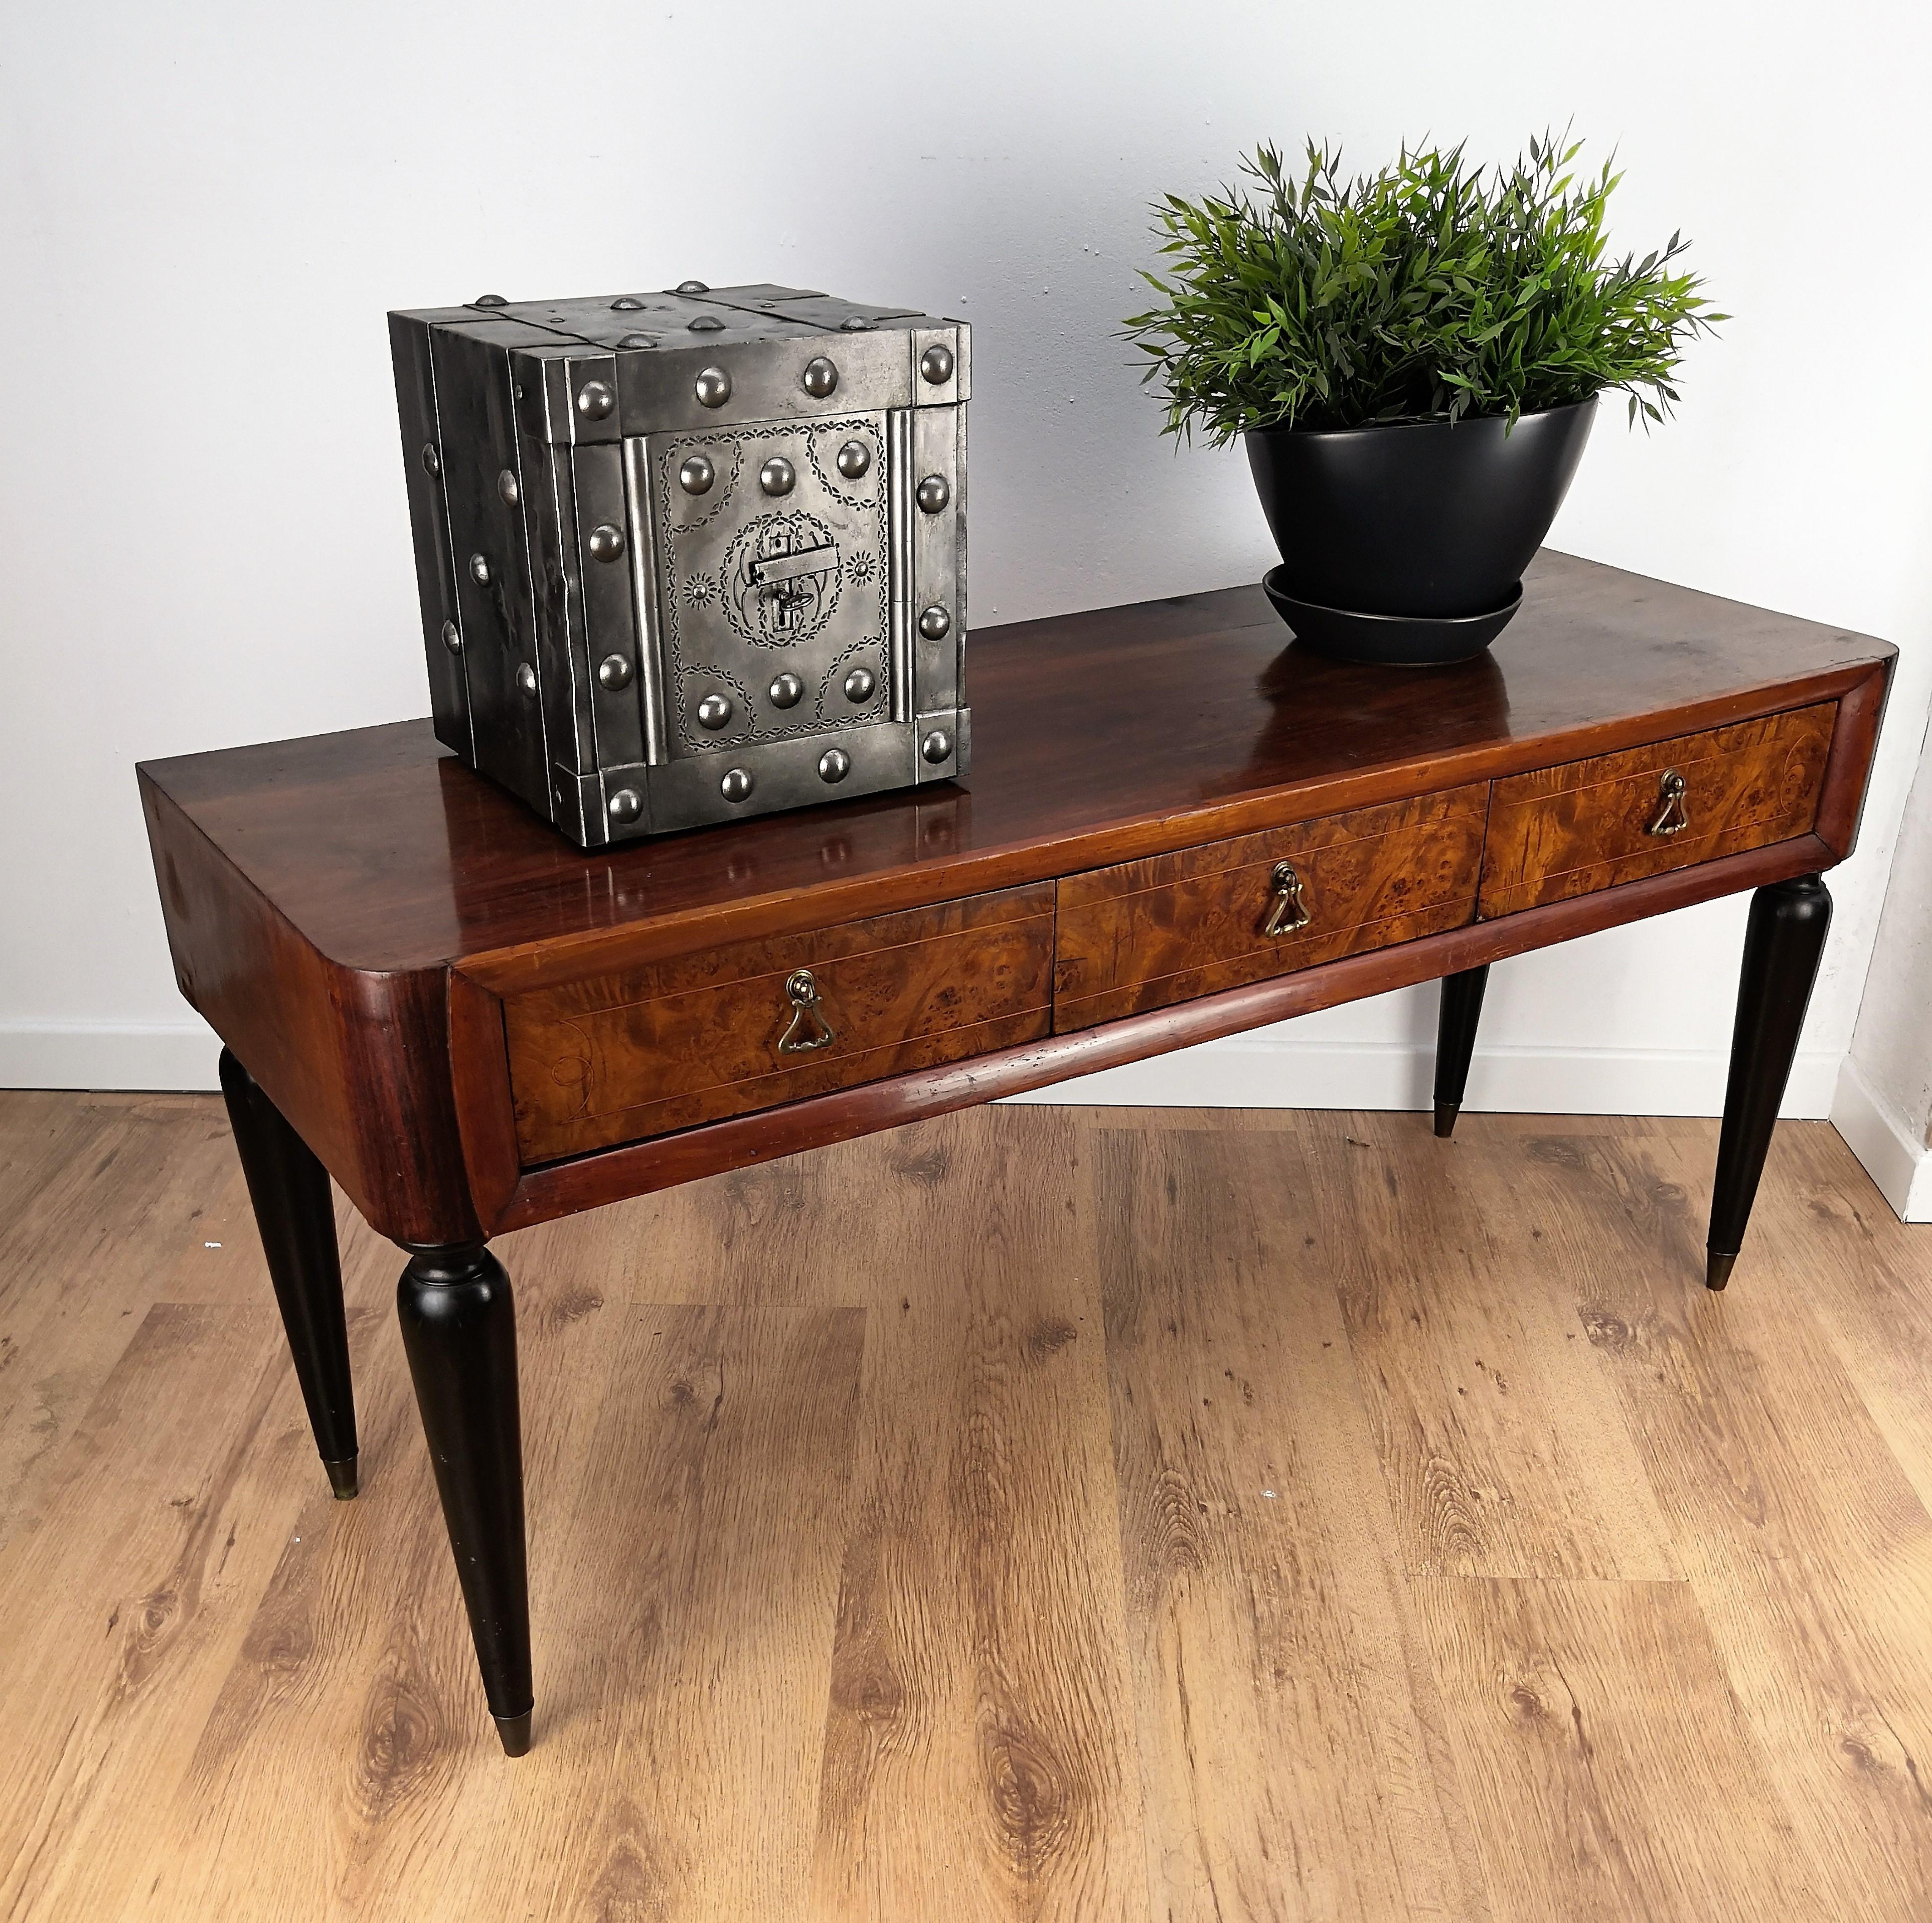 Very elegant Italian Art Deco low consolle side table, ideal as TV stand, in walnut with applied burl elm, three drawers and original antique brass handles. 

The Art Deco style, that preceded Hollywood Regency and thereafter Mid-Century Modern,